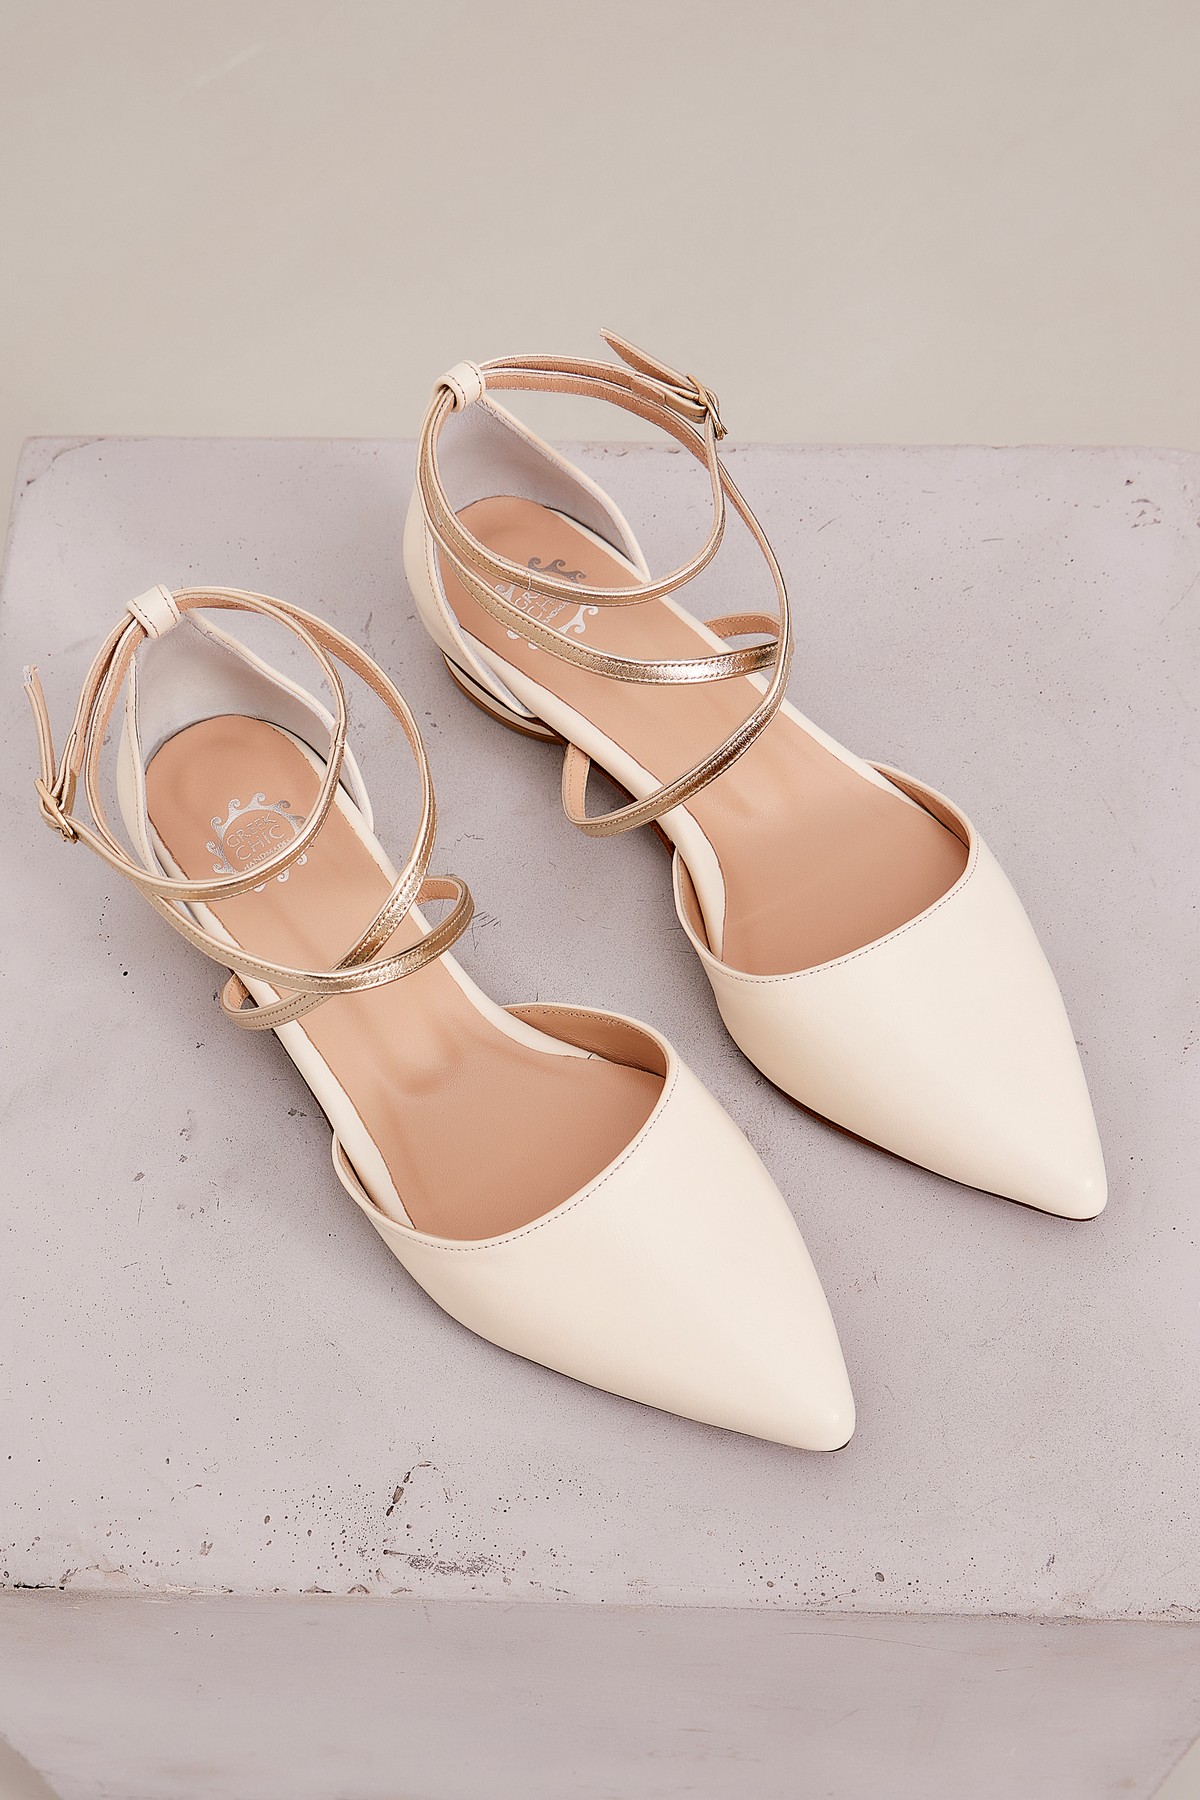 leather flat shoes for wedding